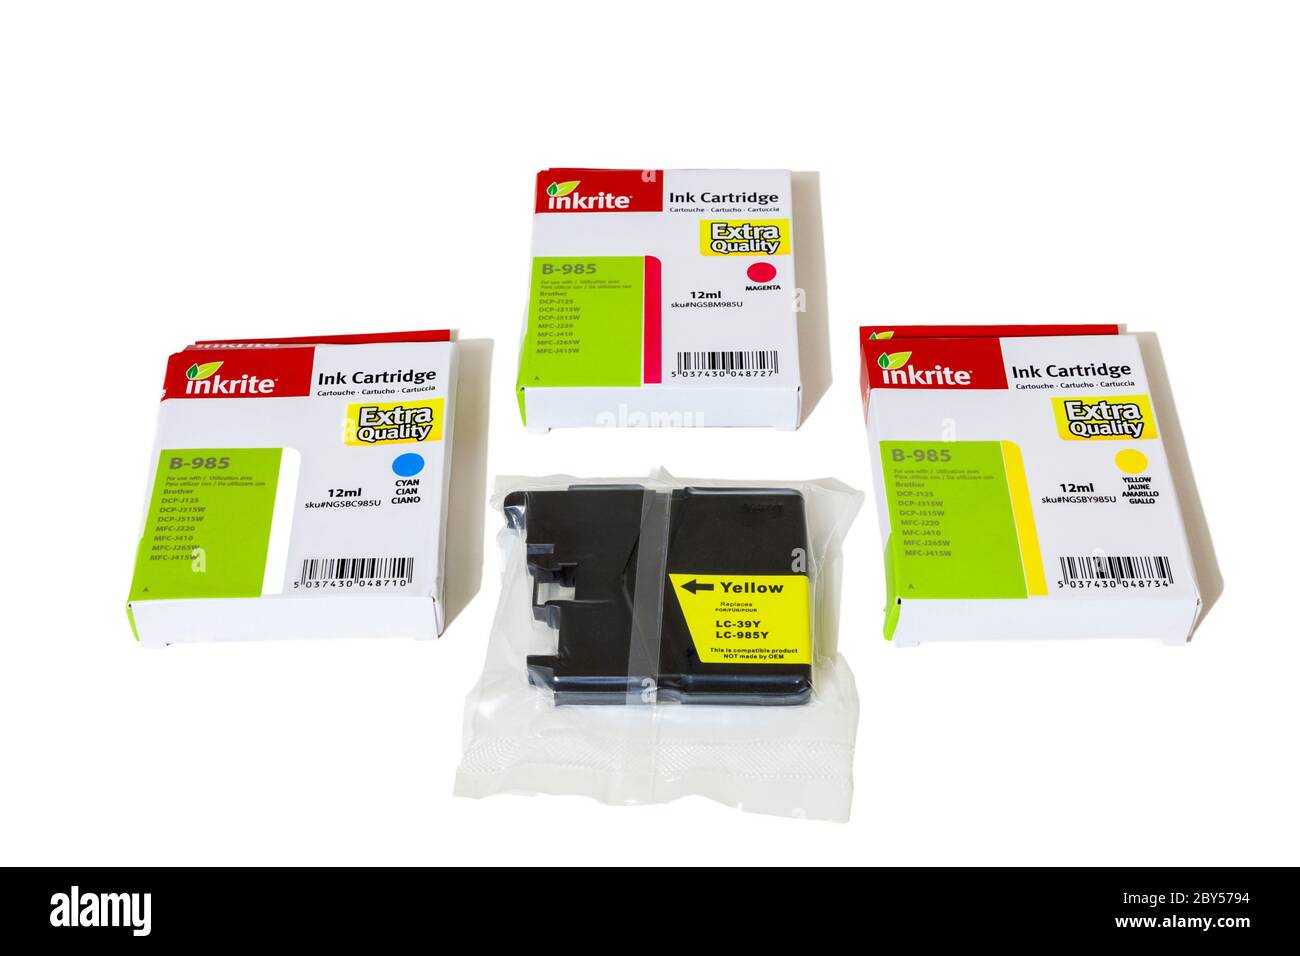 Third party compatible printer ink cartridges by Inkrite for a Brother printer Stock Photo